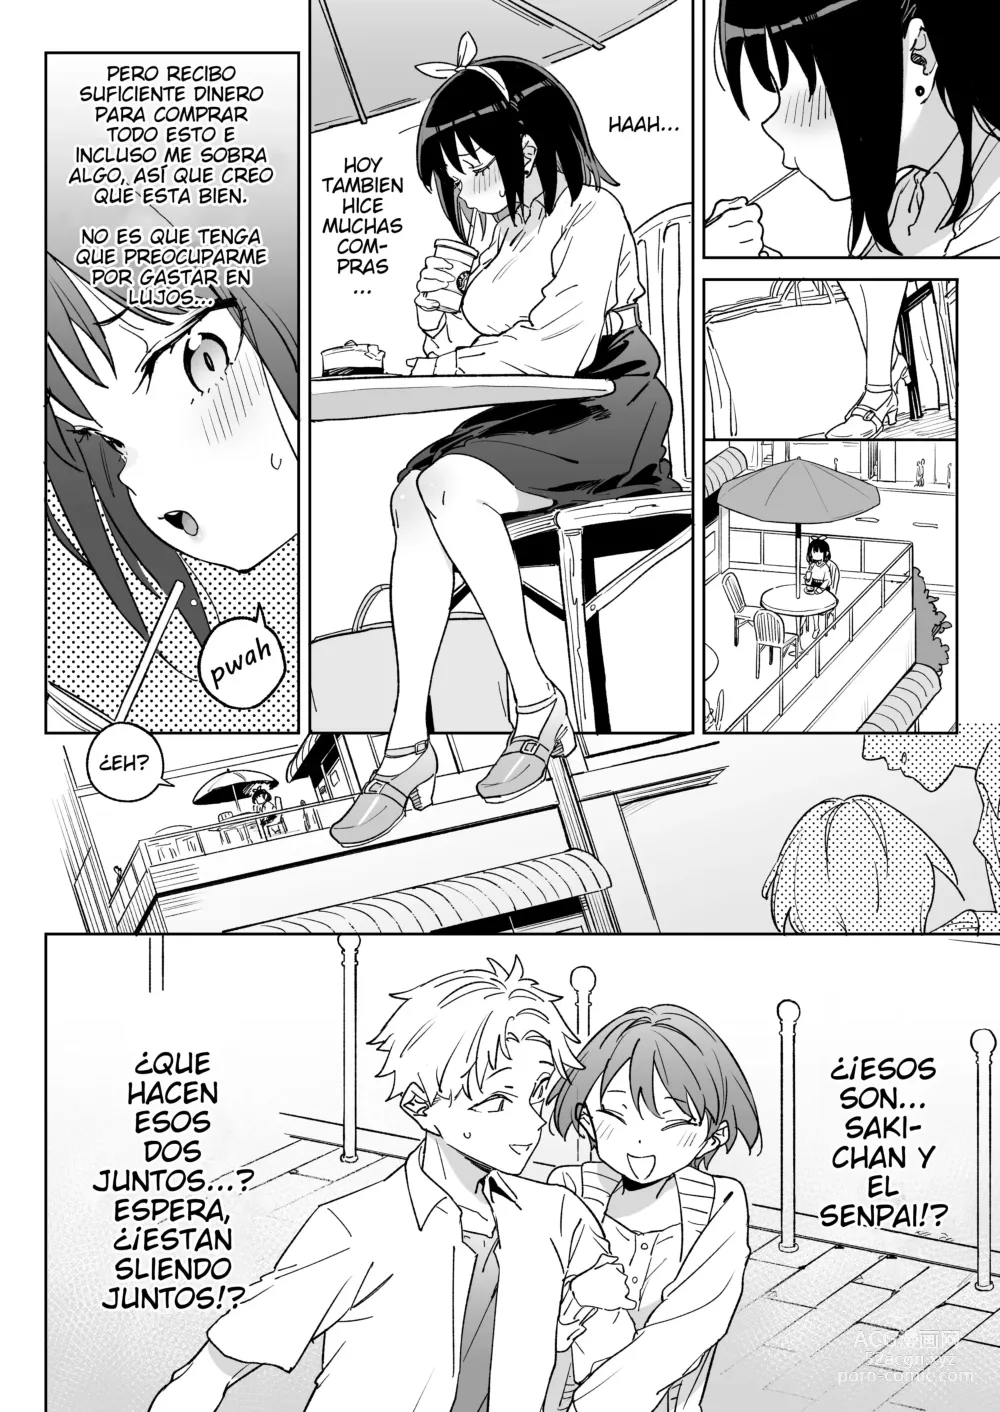 Page 13 of doujinshi November 28th: As of today, I belong to my new daddy!